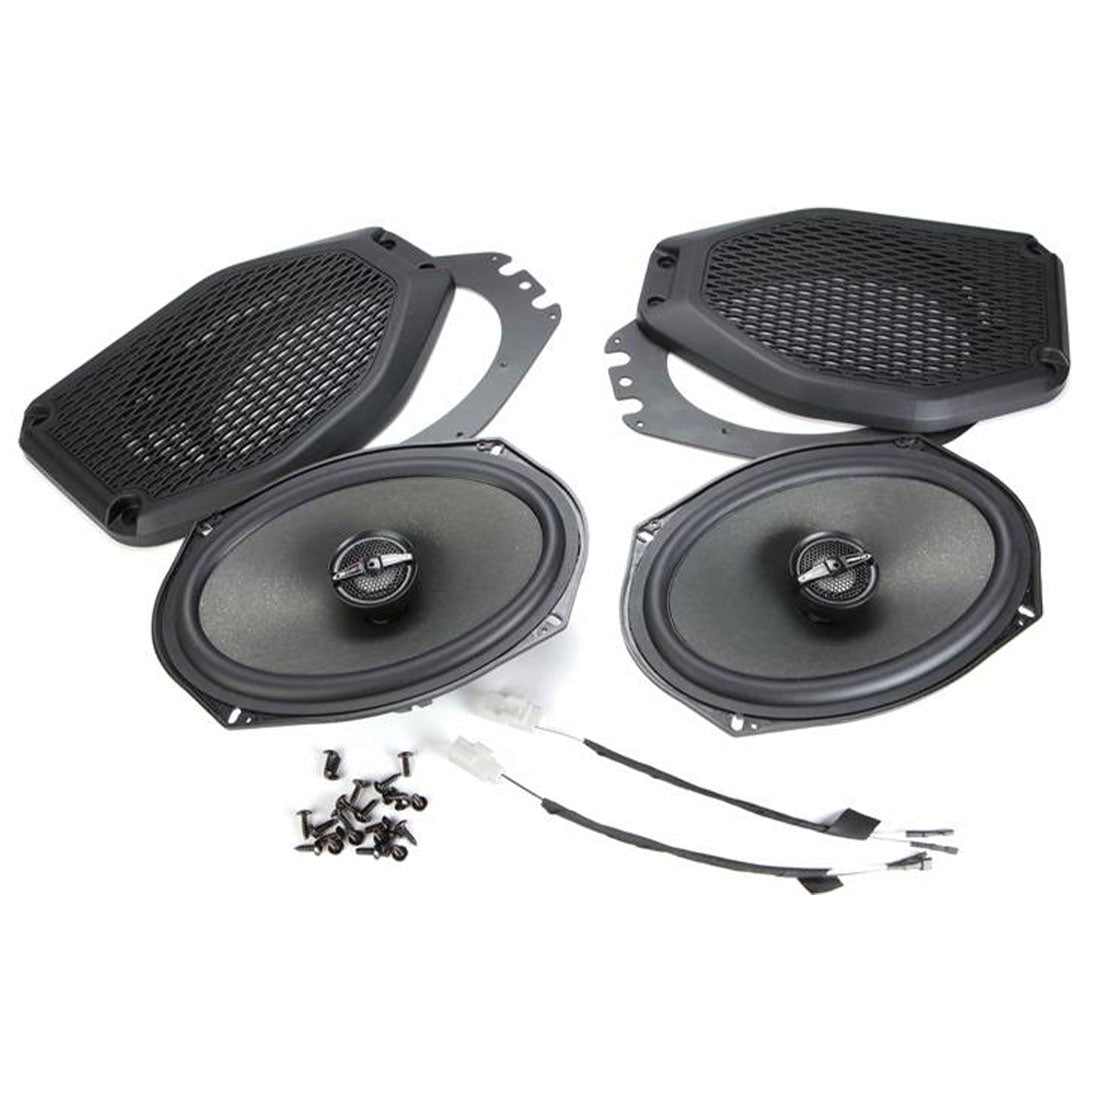 MB Quart JC1-169SB 6x9" Rear Coaxial Speakers Upgrade for Select 2018-up Jeeps